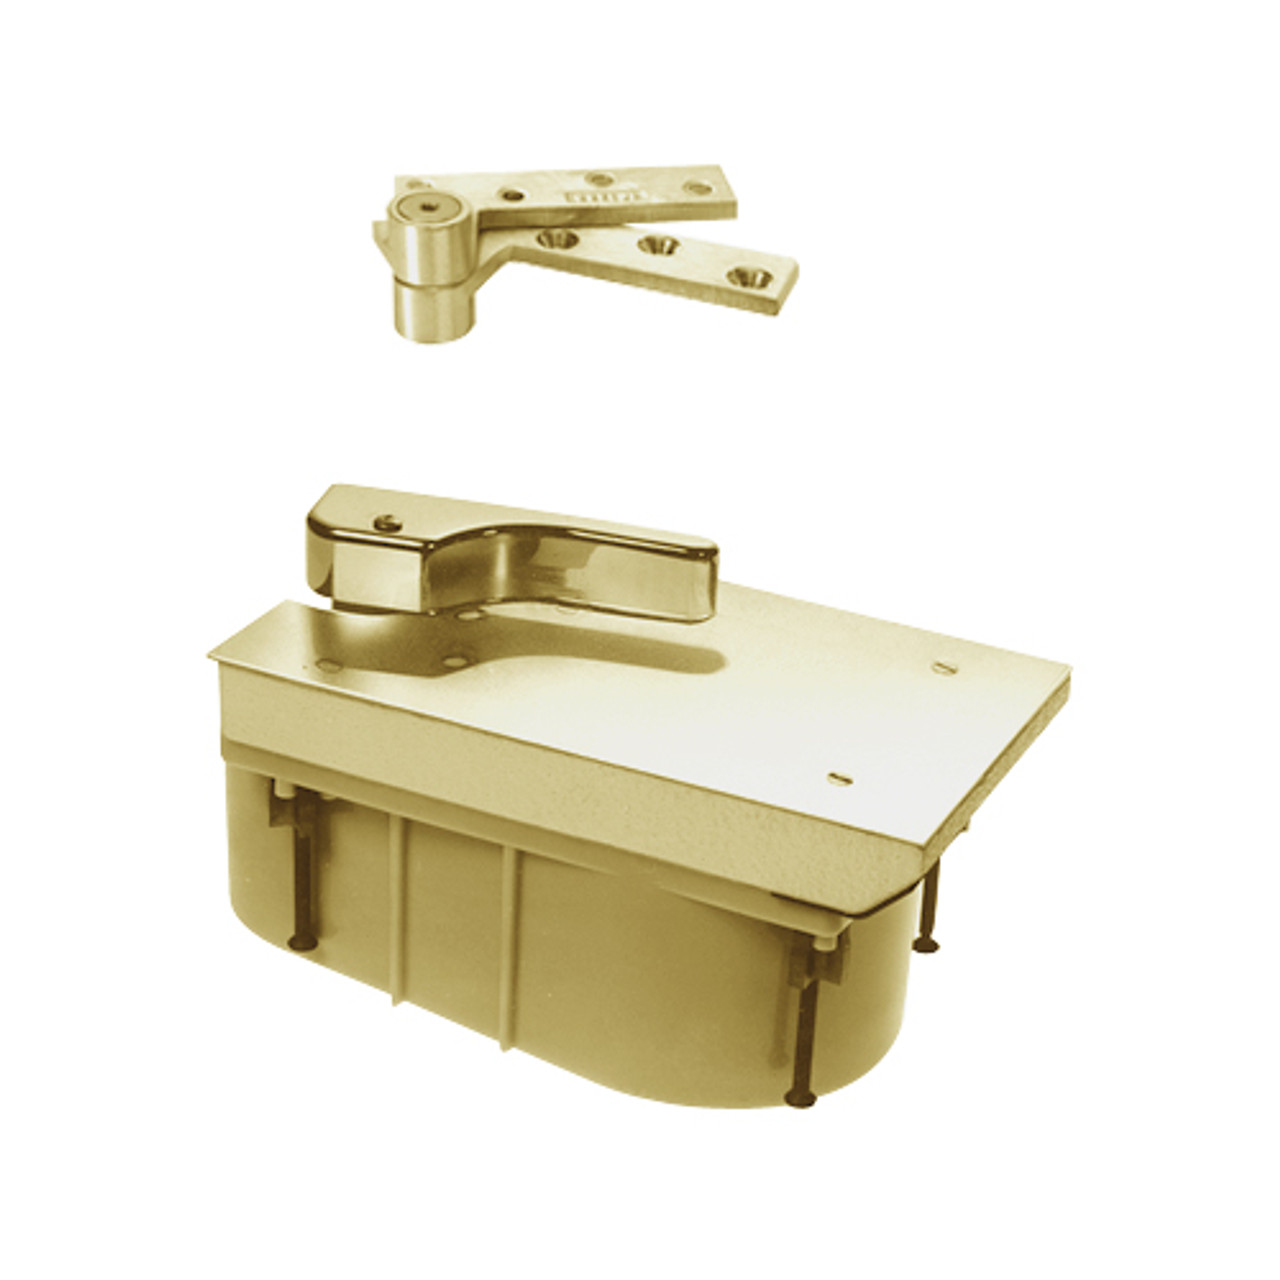 QT27-95S-CWF-LH-606 Rixson 27 Series Heavy Duty Quick Install Offset Hung Floor Closer in Satin Brass Finish